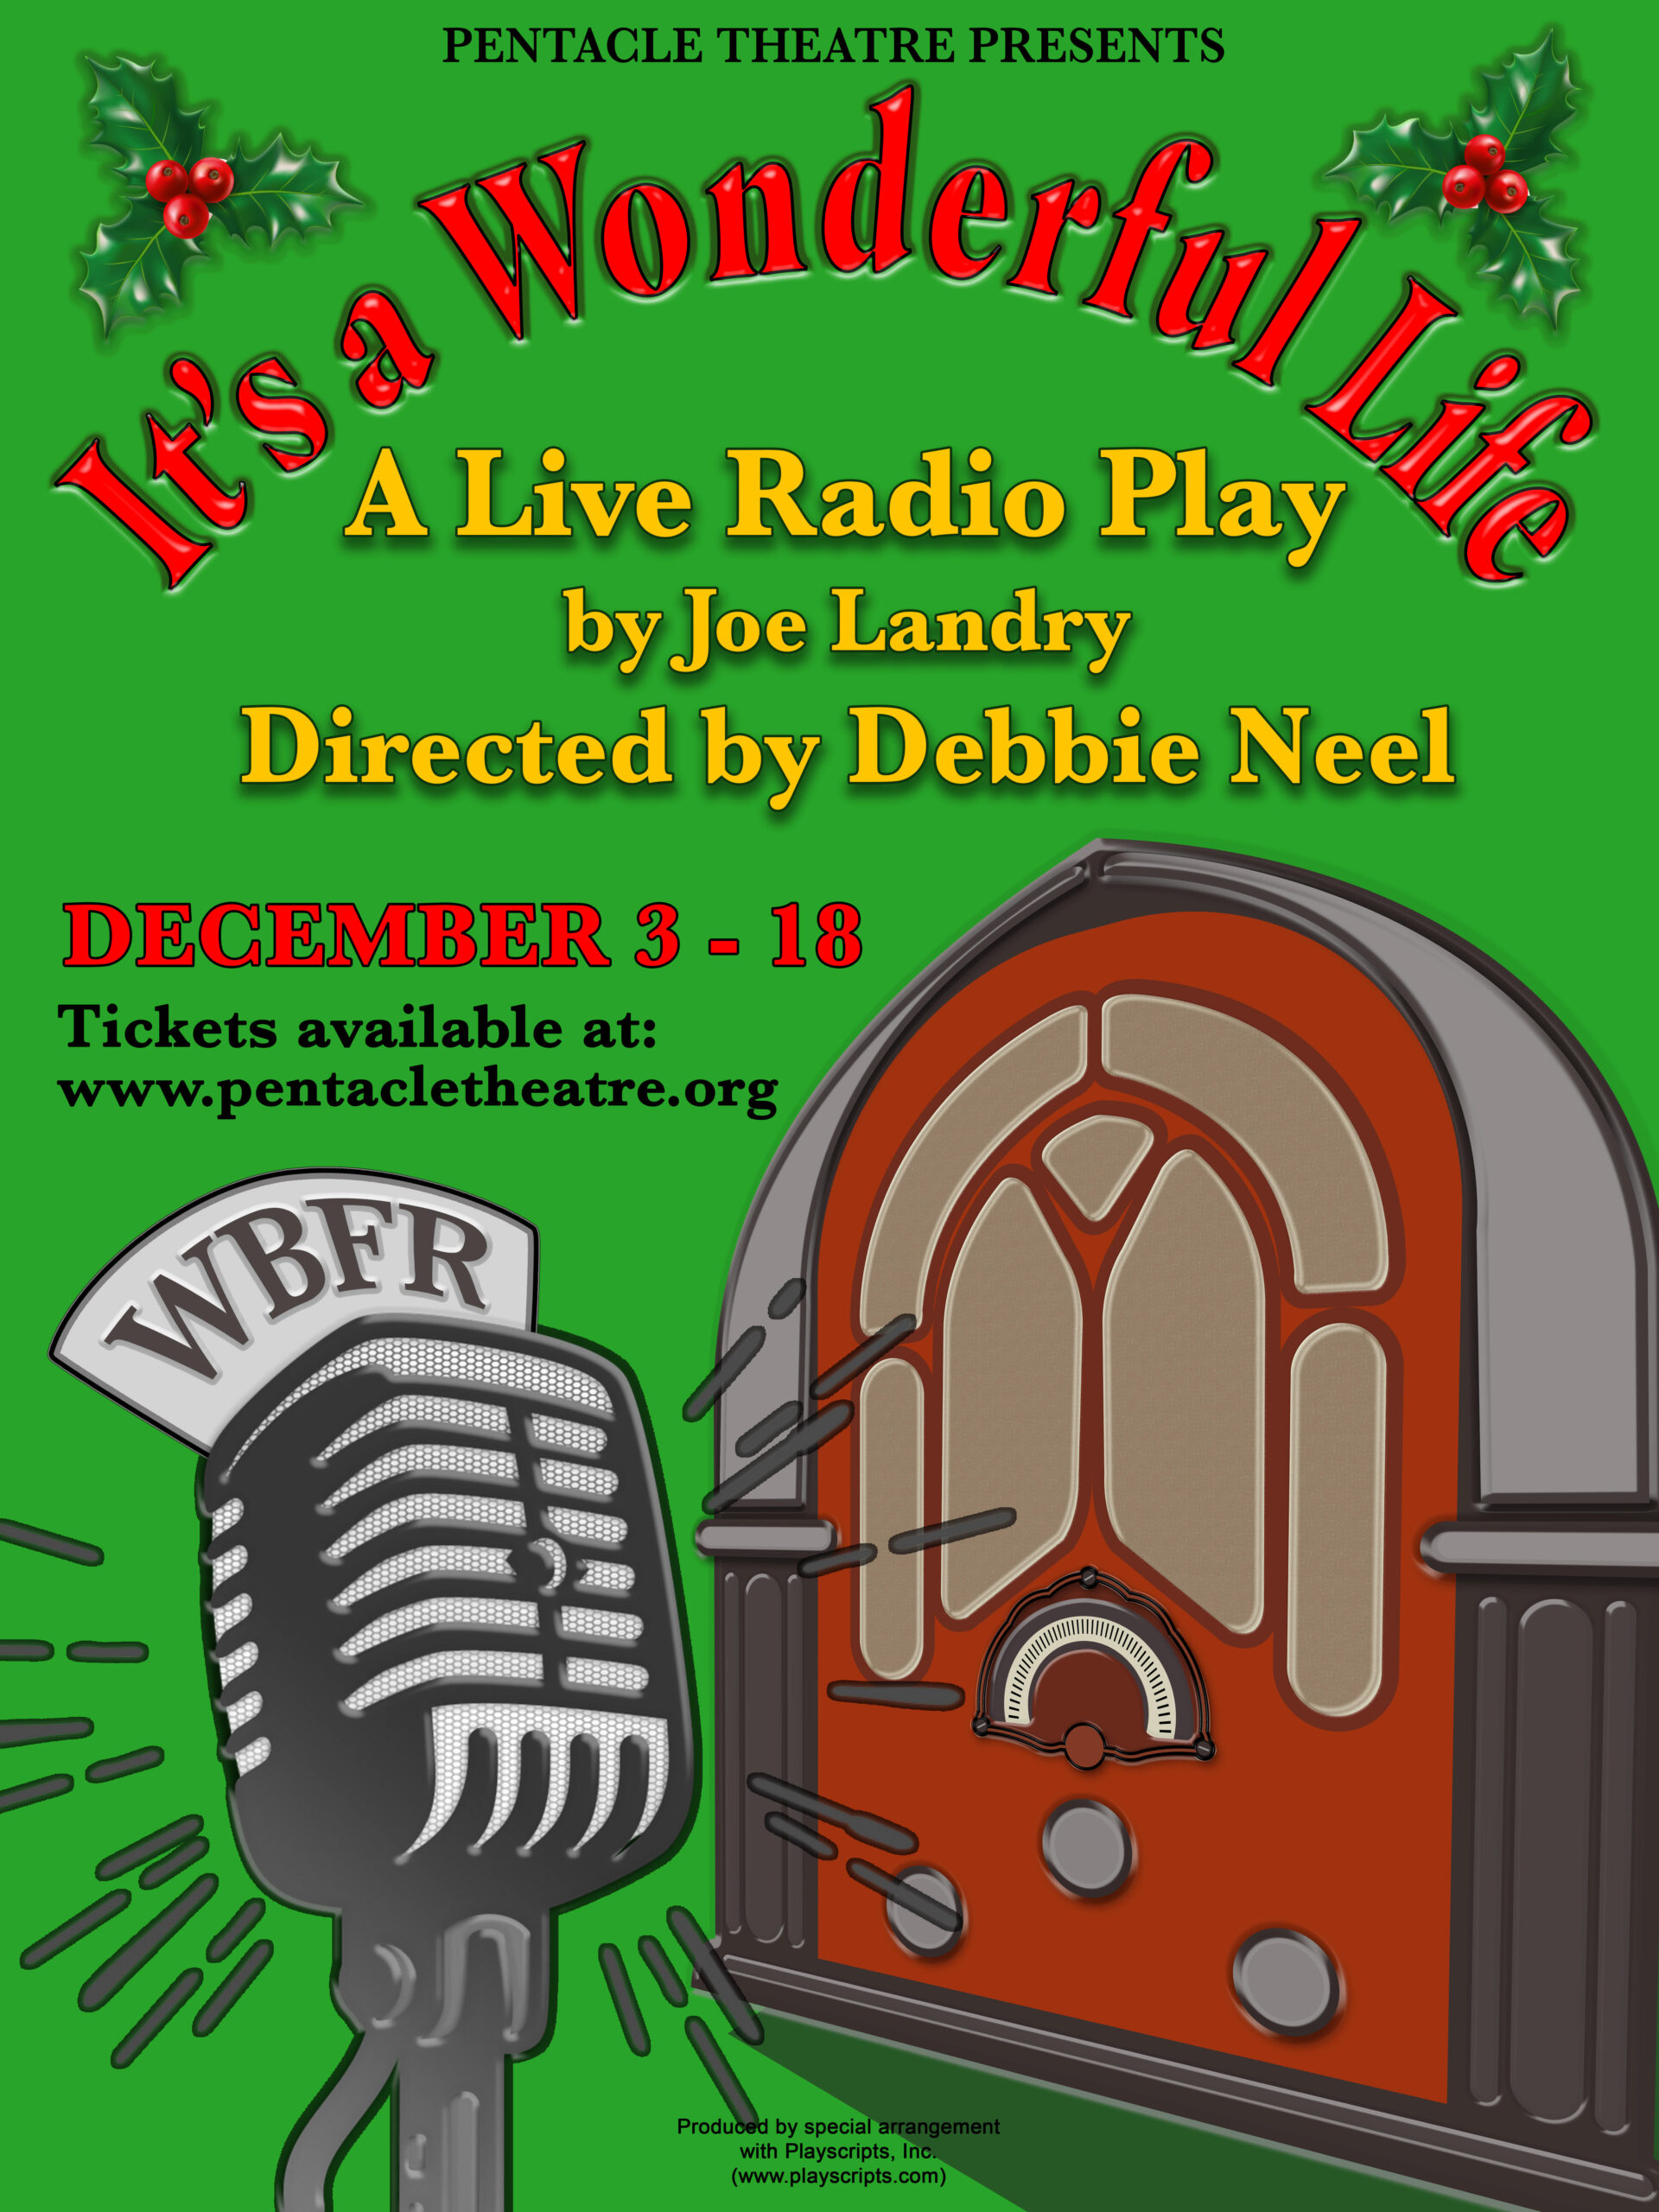 Program for “It’s a Wonderful Life: A Live Radio Play”